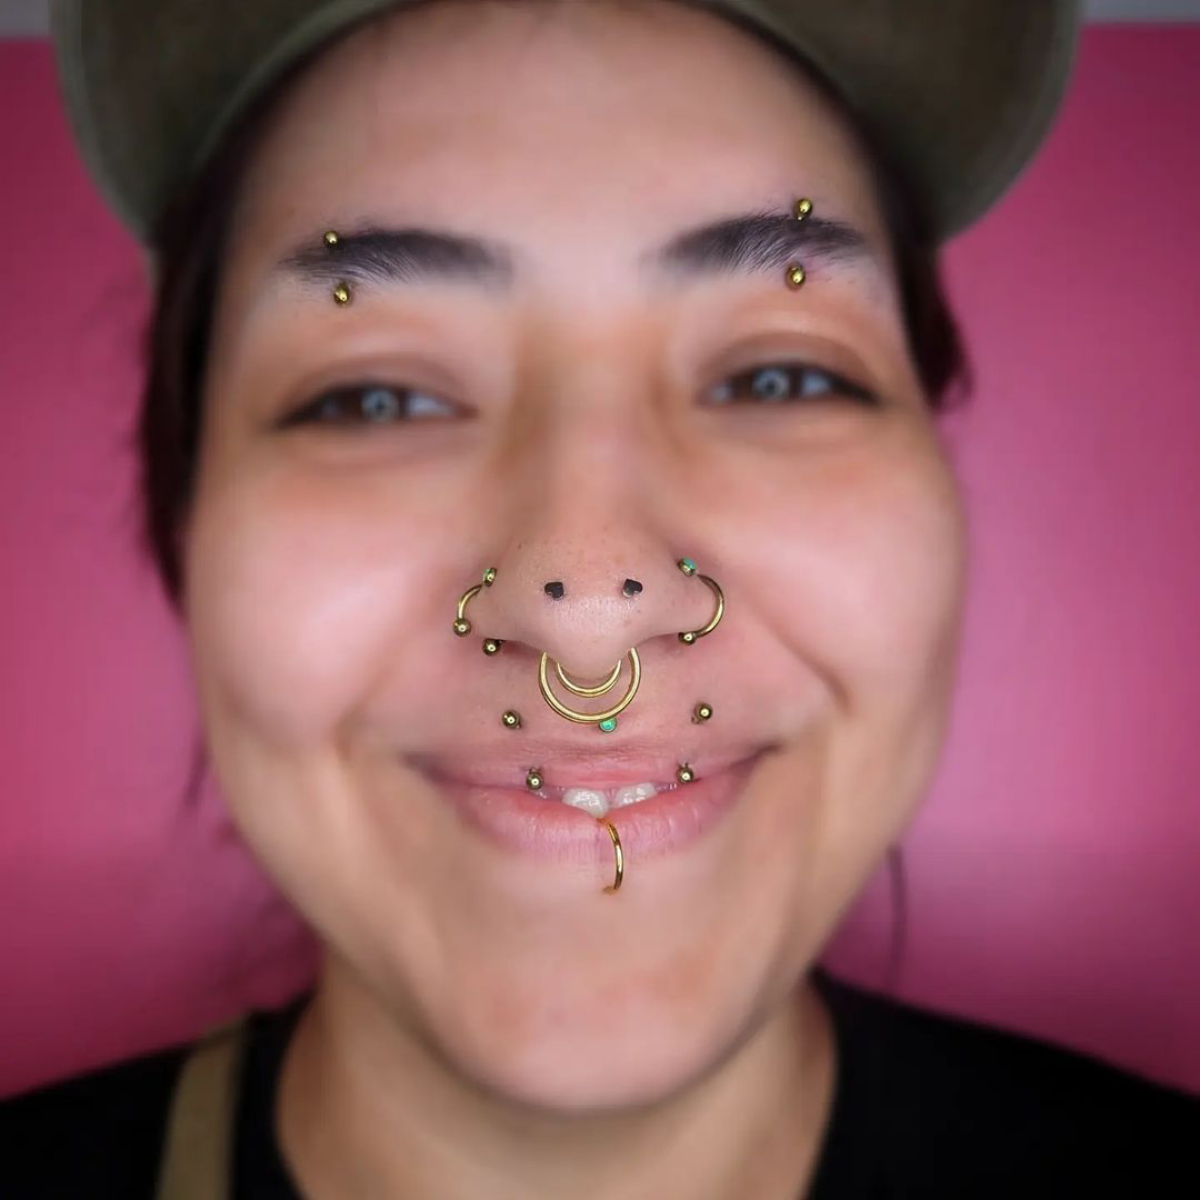 8 woman with multiple face piercings